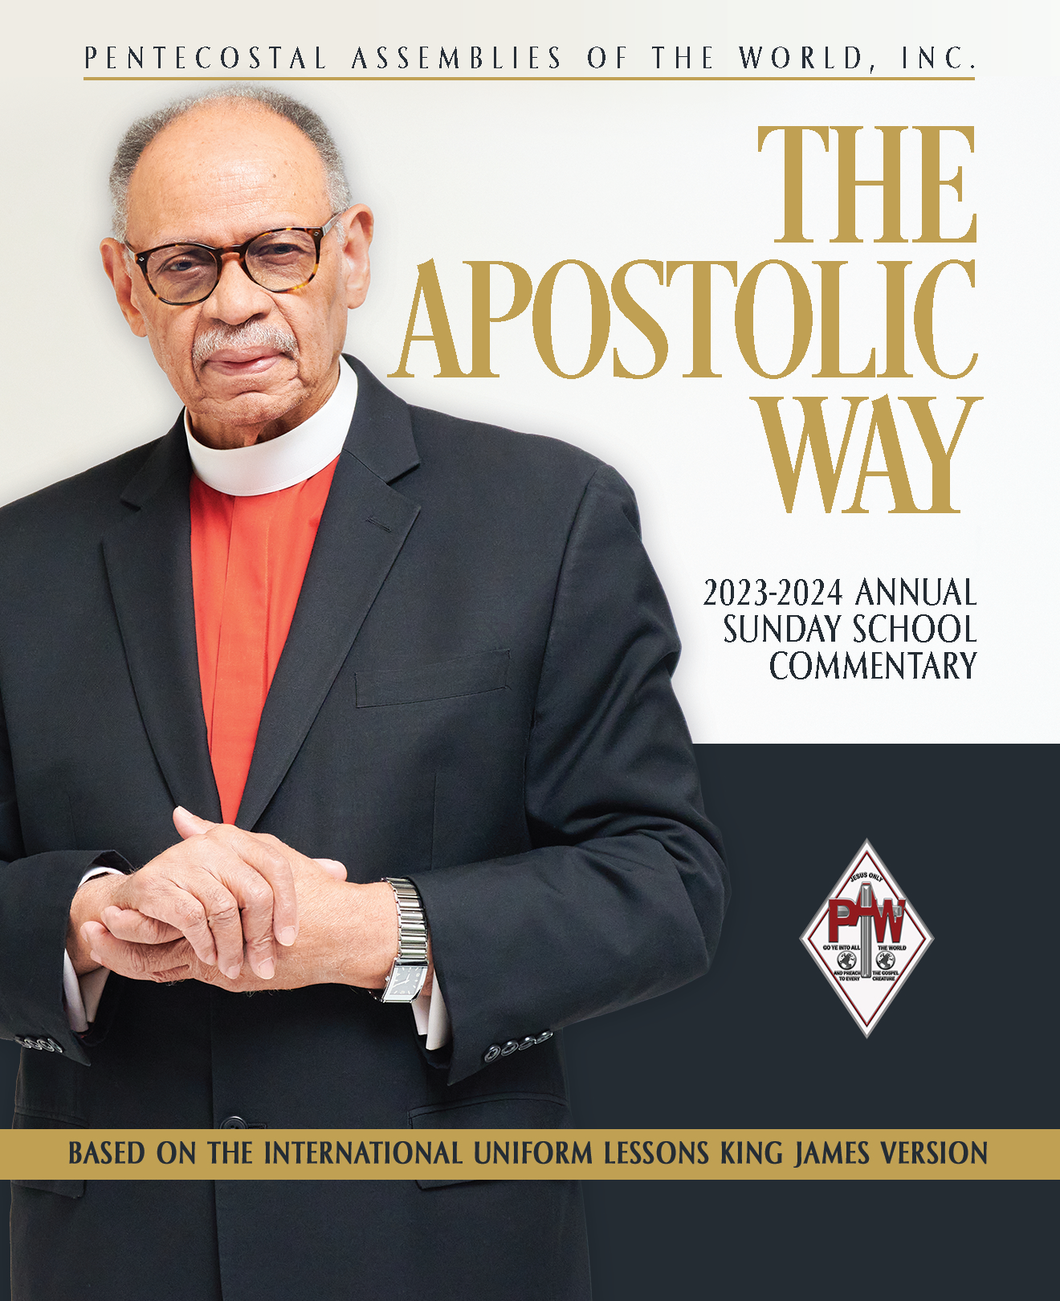 Apostolic Way Annual Commentary 2023-2024 (Ships Mid-August 2023)